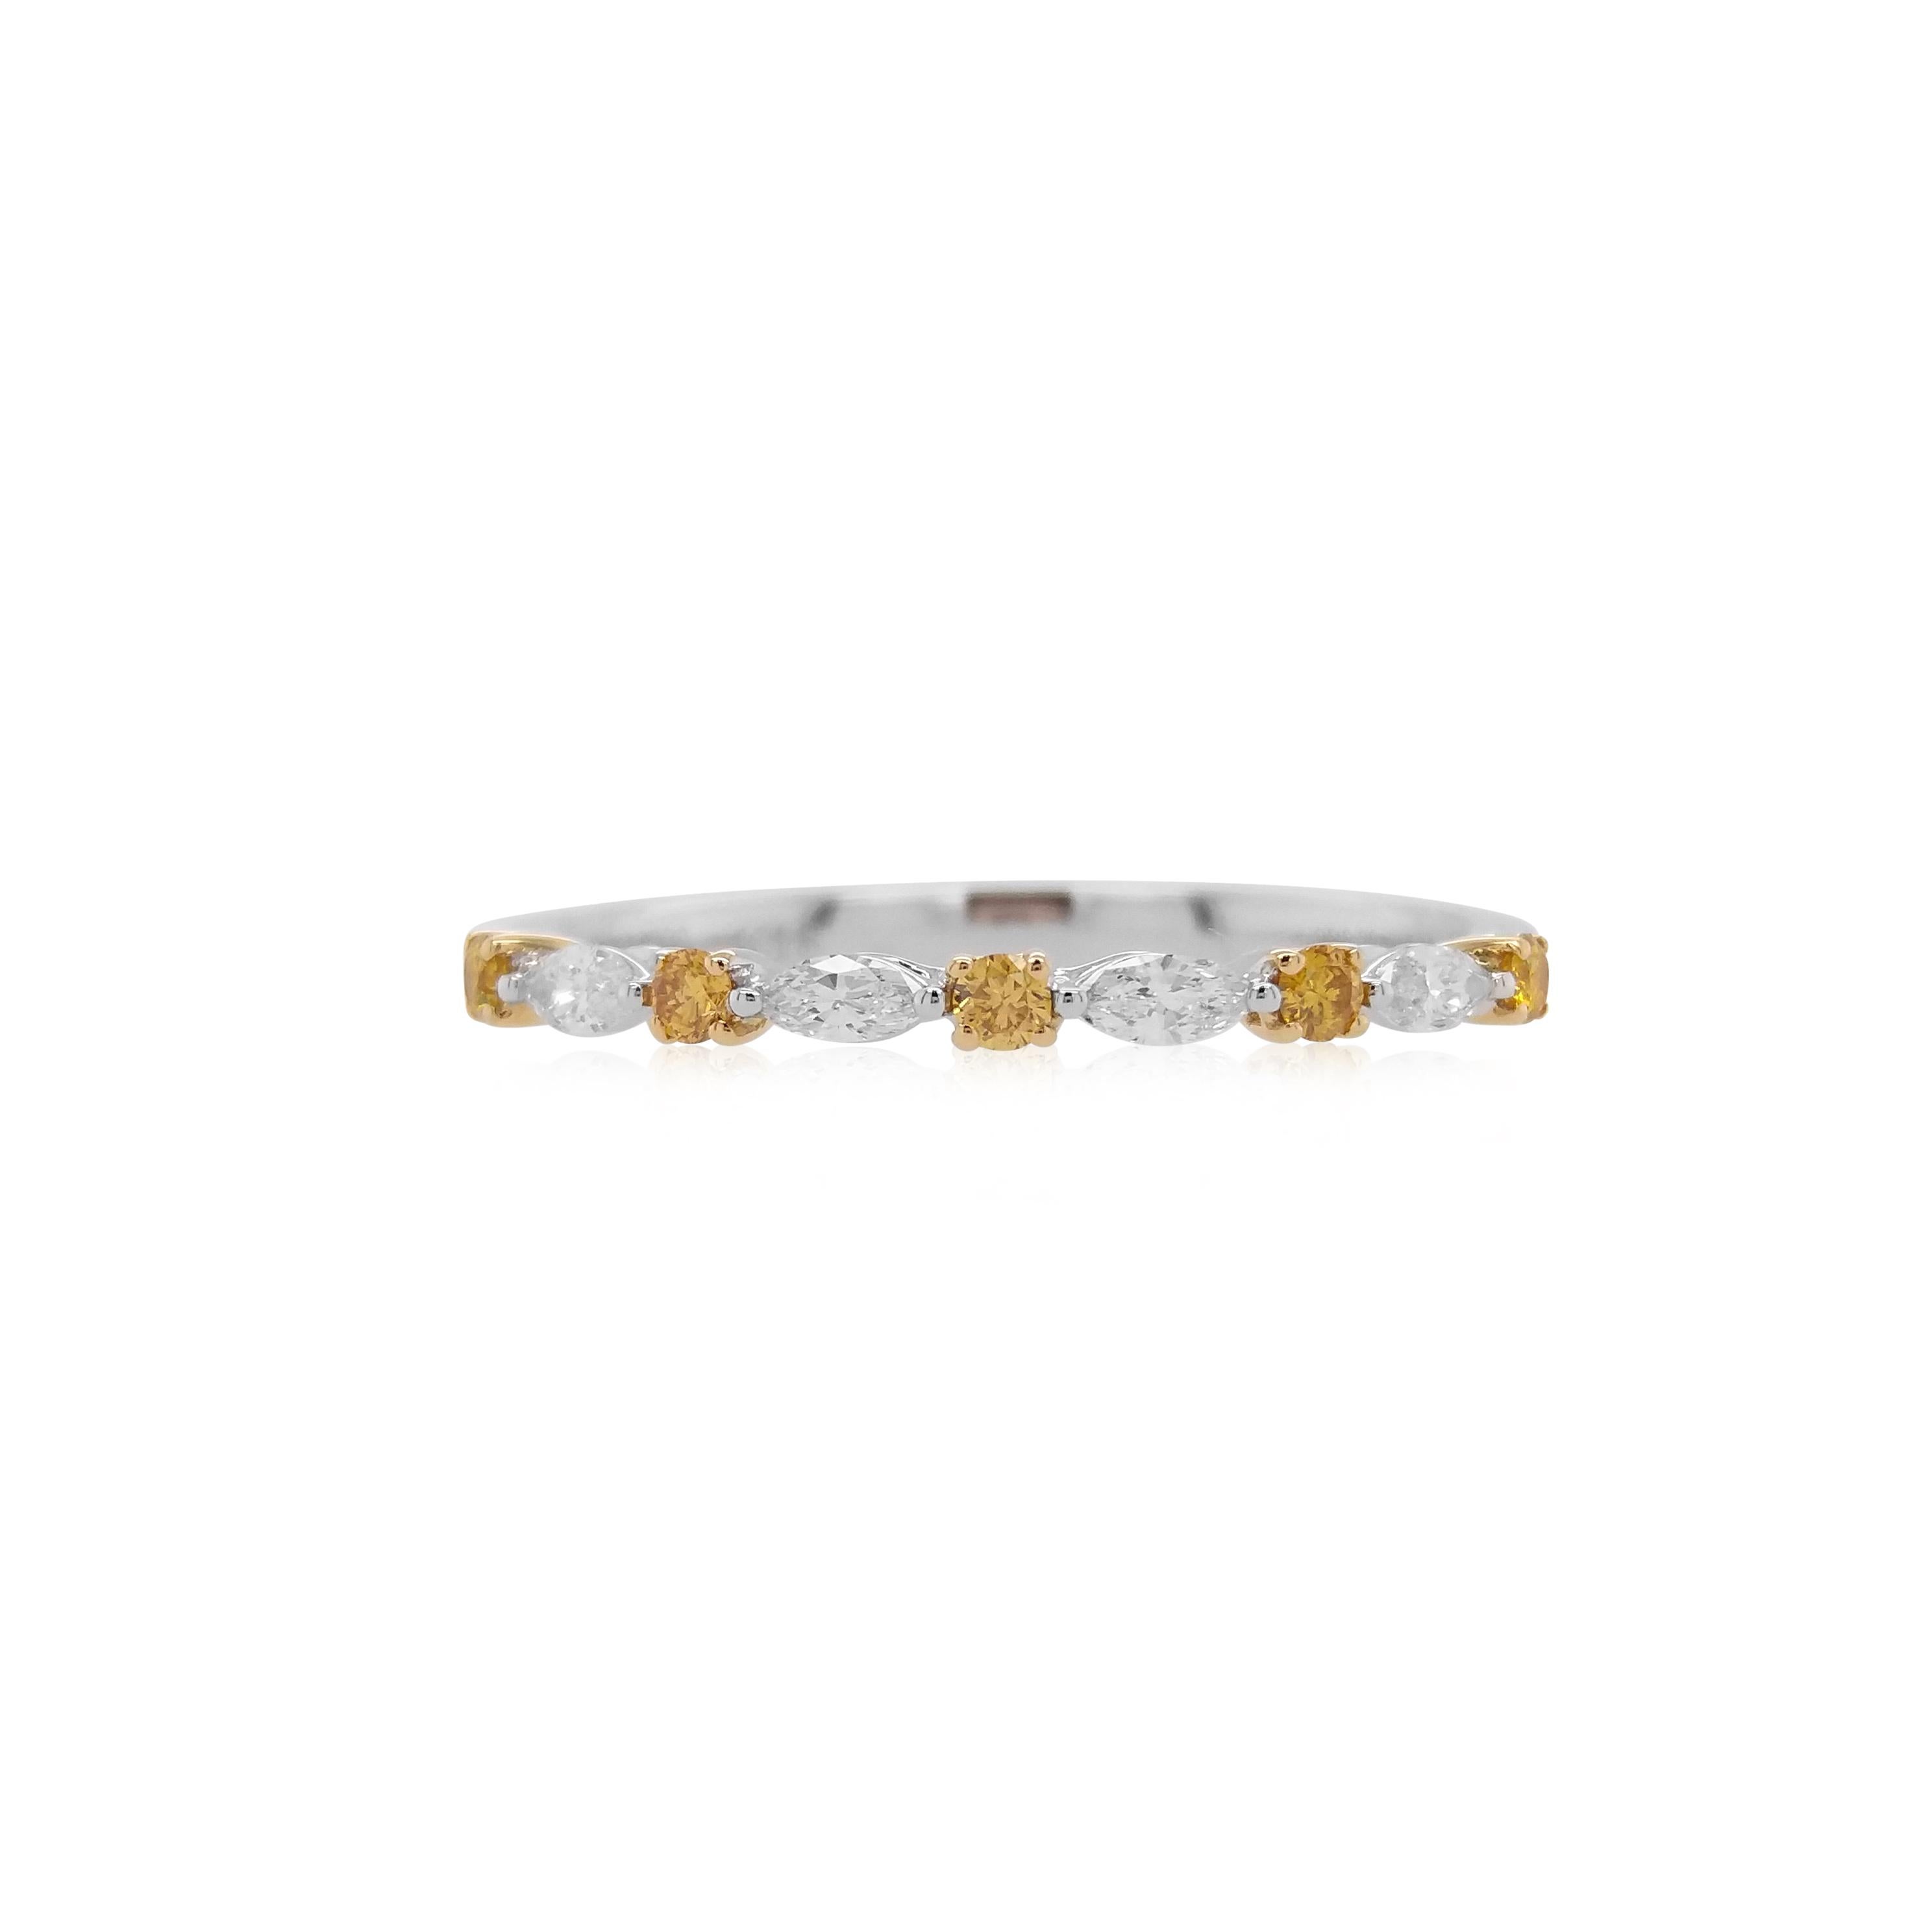 An elegant ring with alternate designs of Round brilliant cut Yellow diamonds and Marquise White diamonds set in a band of white diamonds

Natural Yellow Diamonds- 0.09 cts
White Diamond - 0.13 cts

HYT Jewelry is a privately owned company